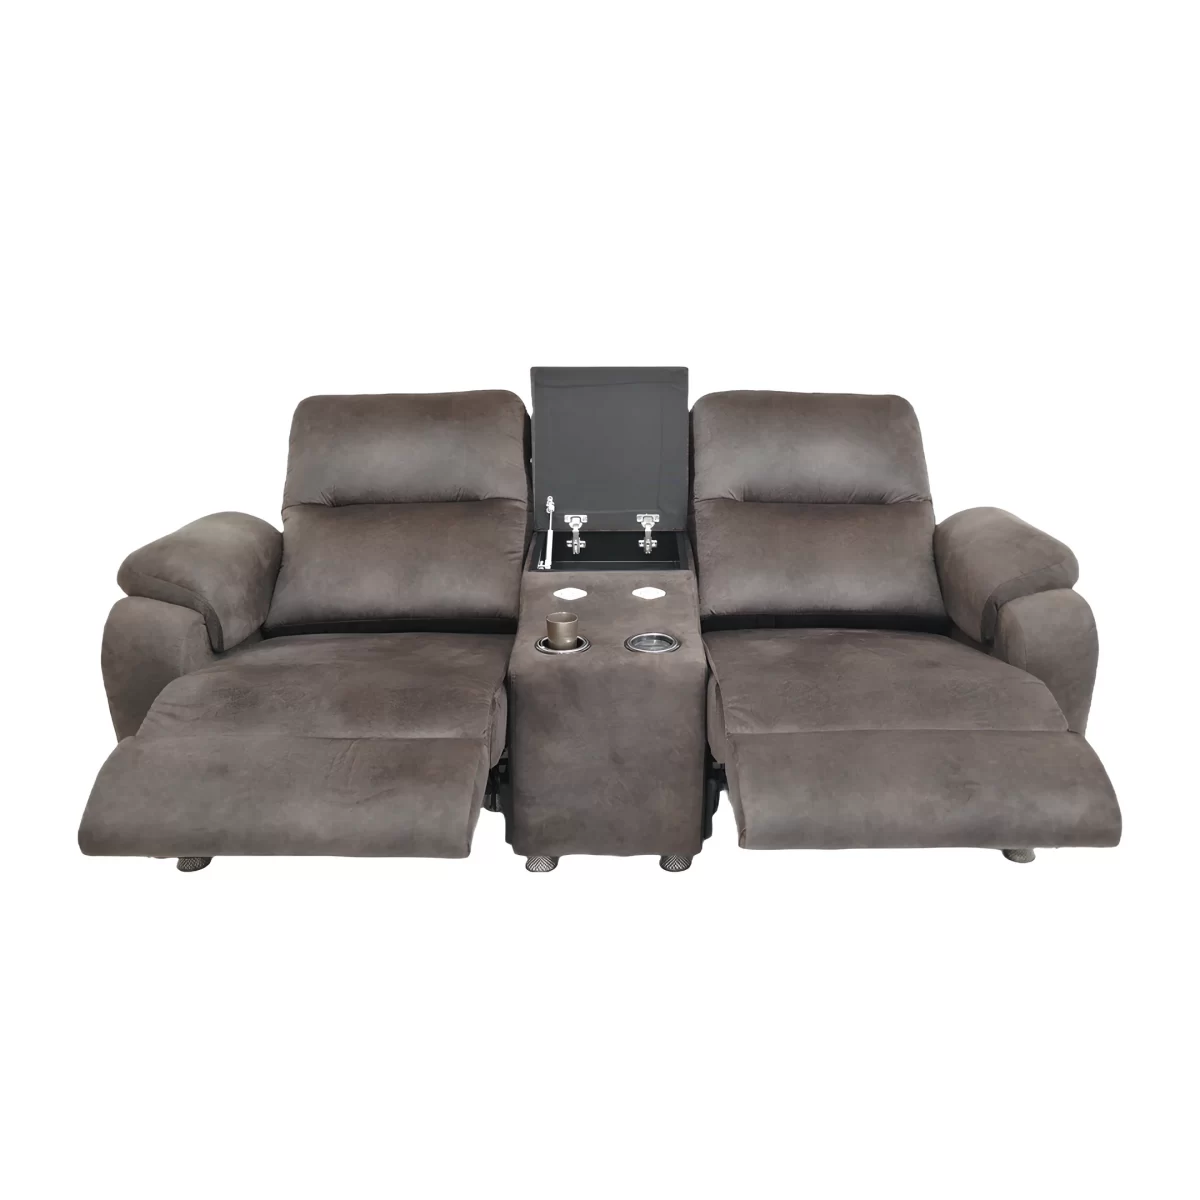 alis double reclining sofa electric recliner usb port cupholder